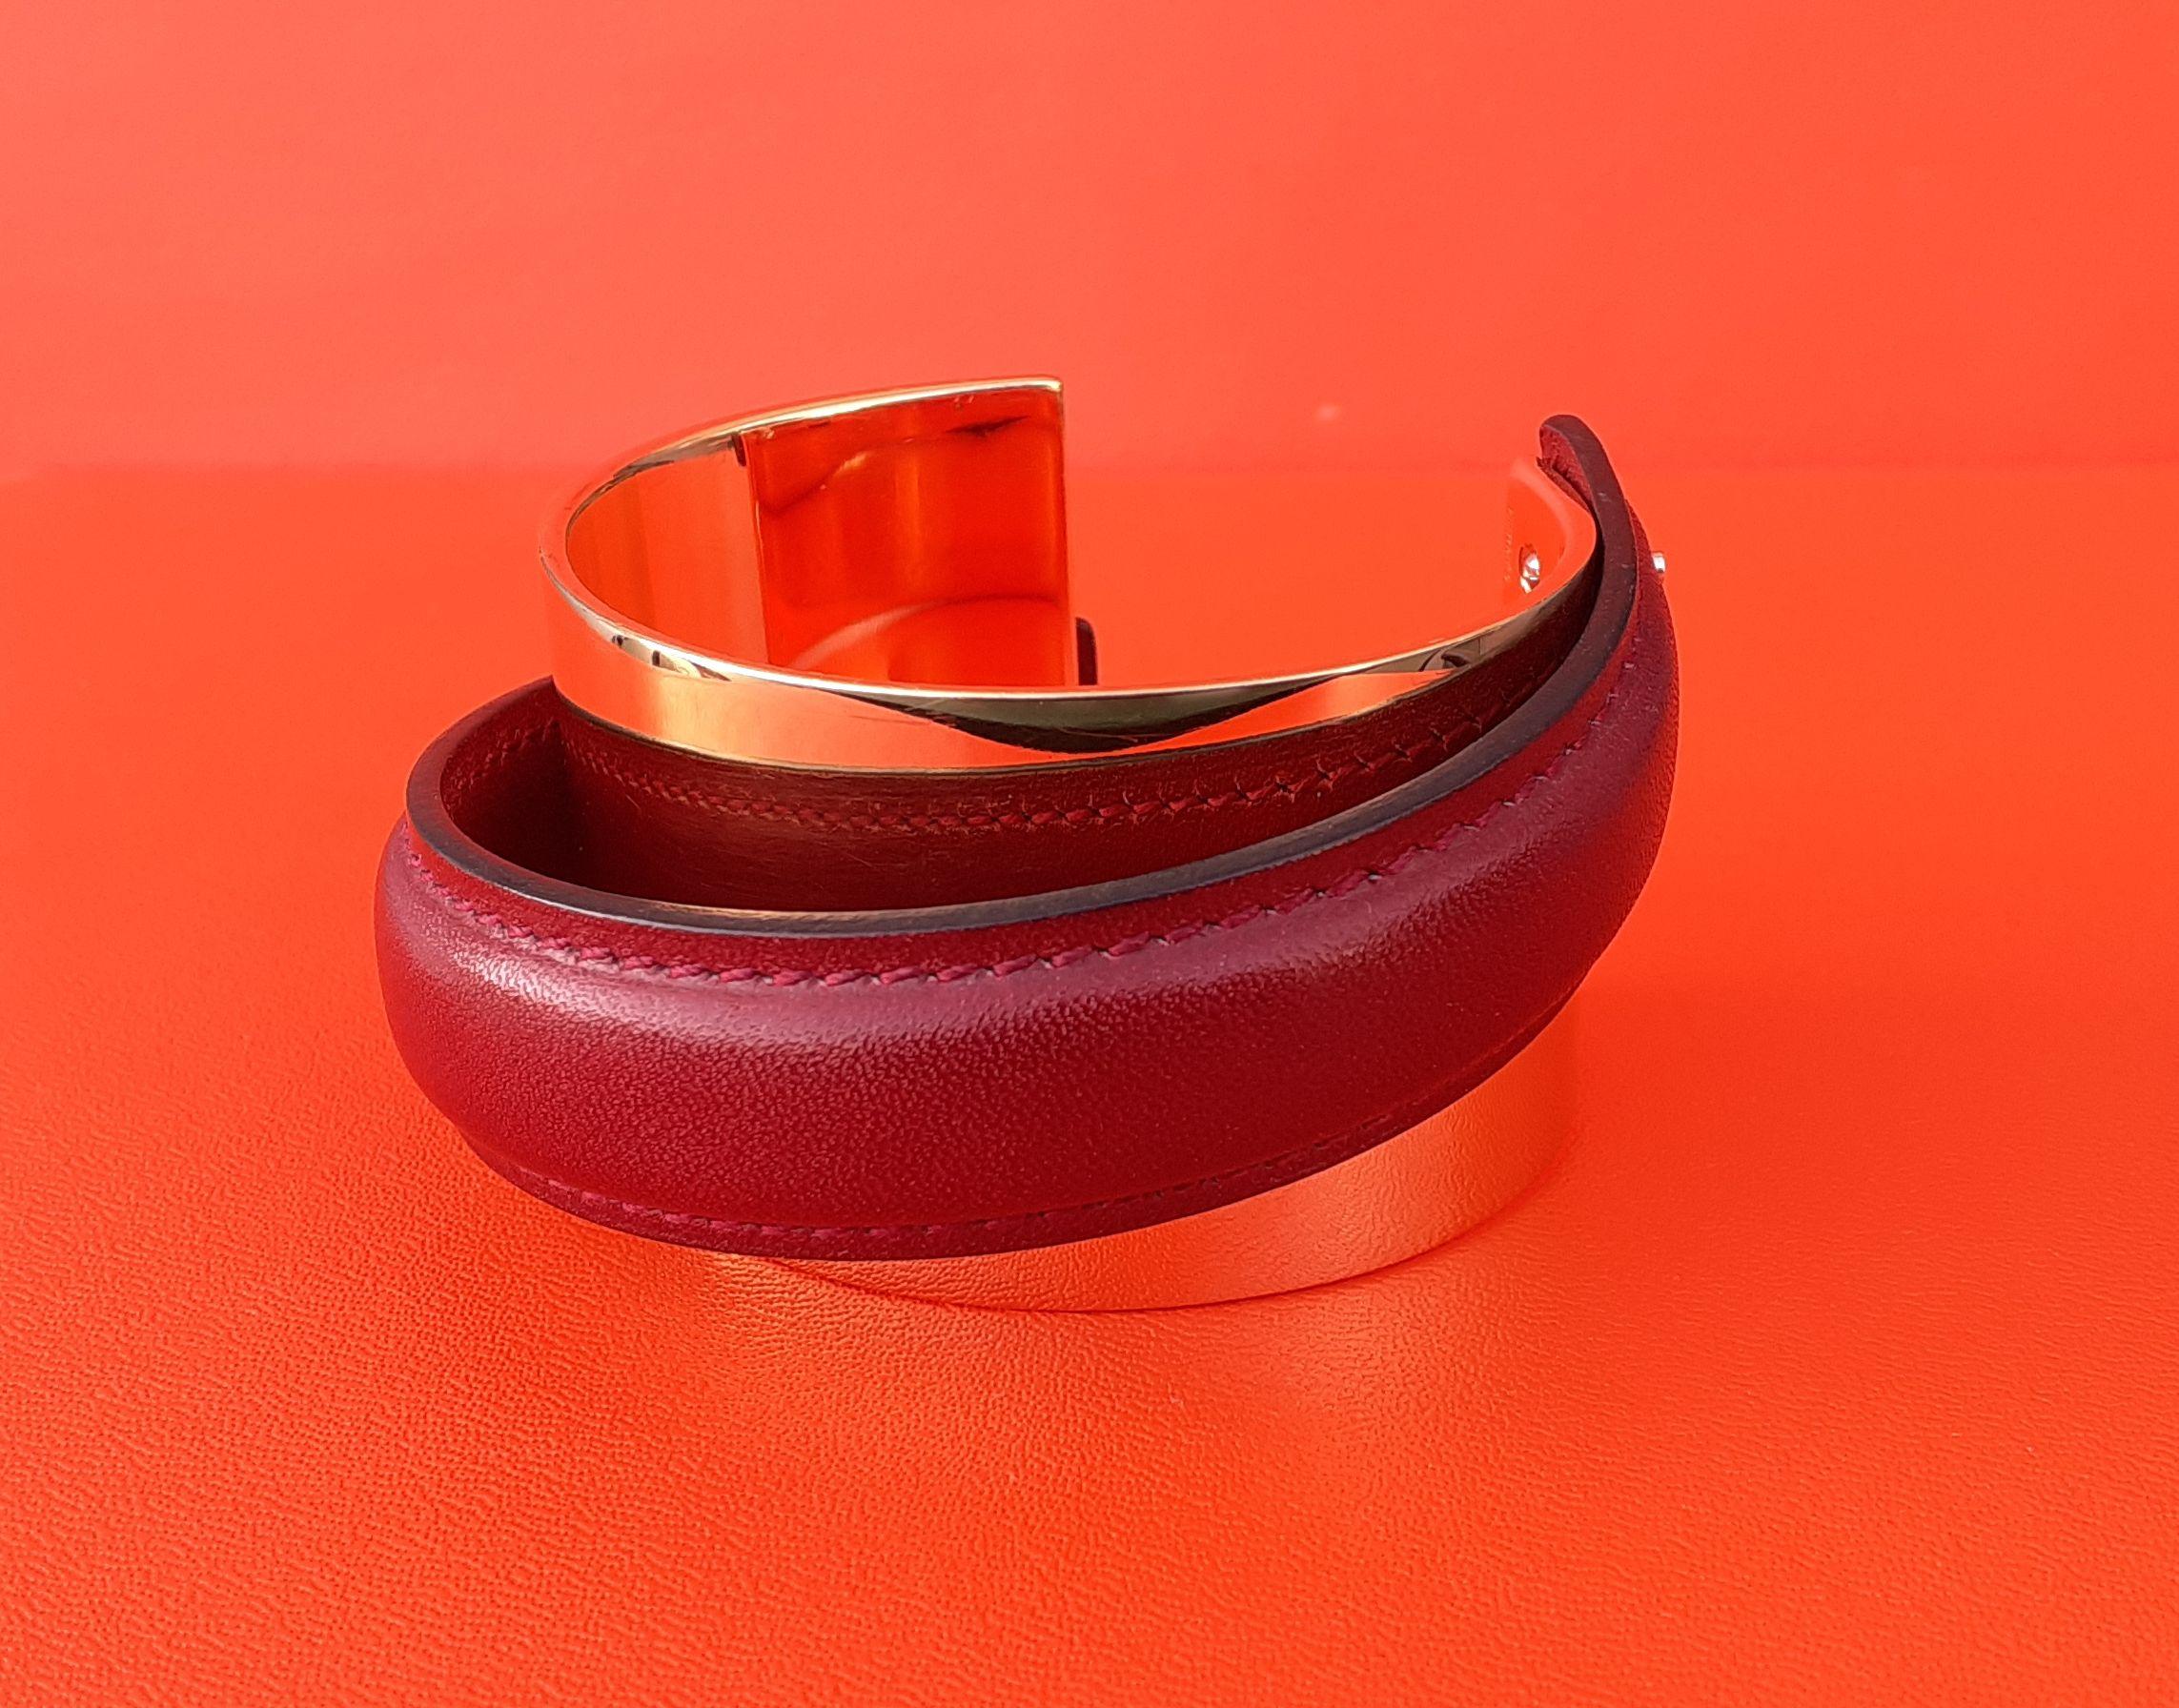 Exceptional Hermès Cuff Bracelet Golden Hdw and Rouge H Box Leather Size L For Sale 4